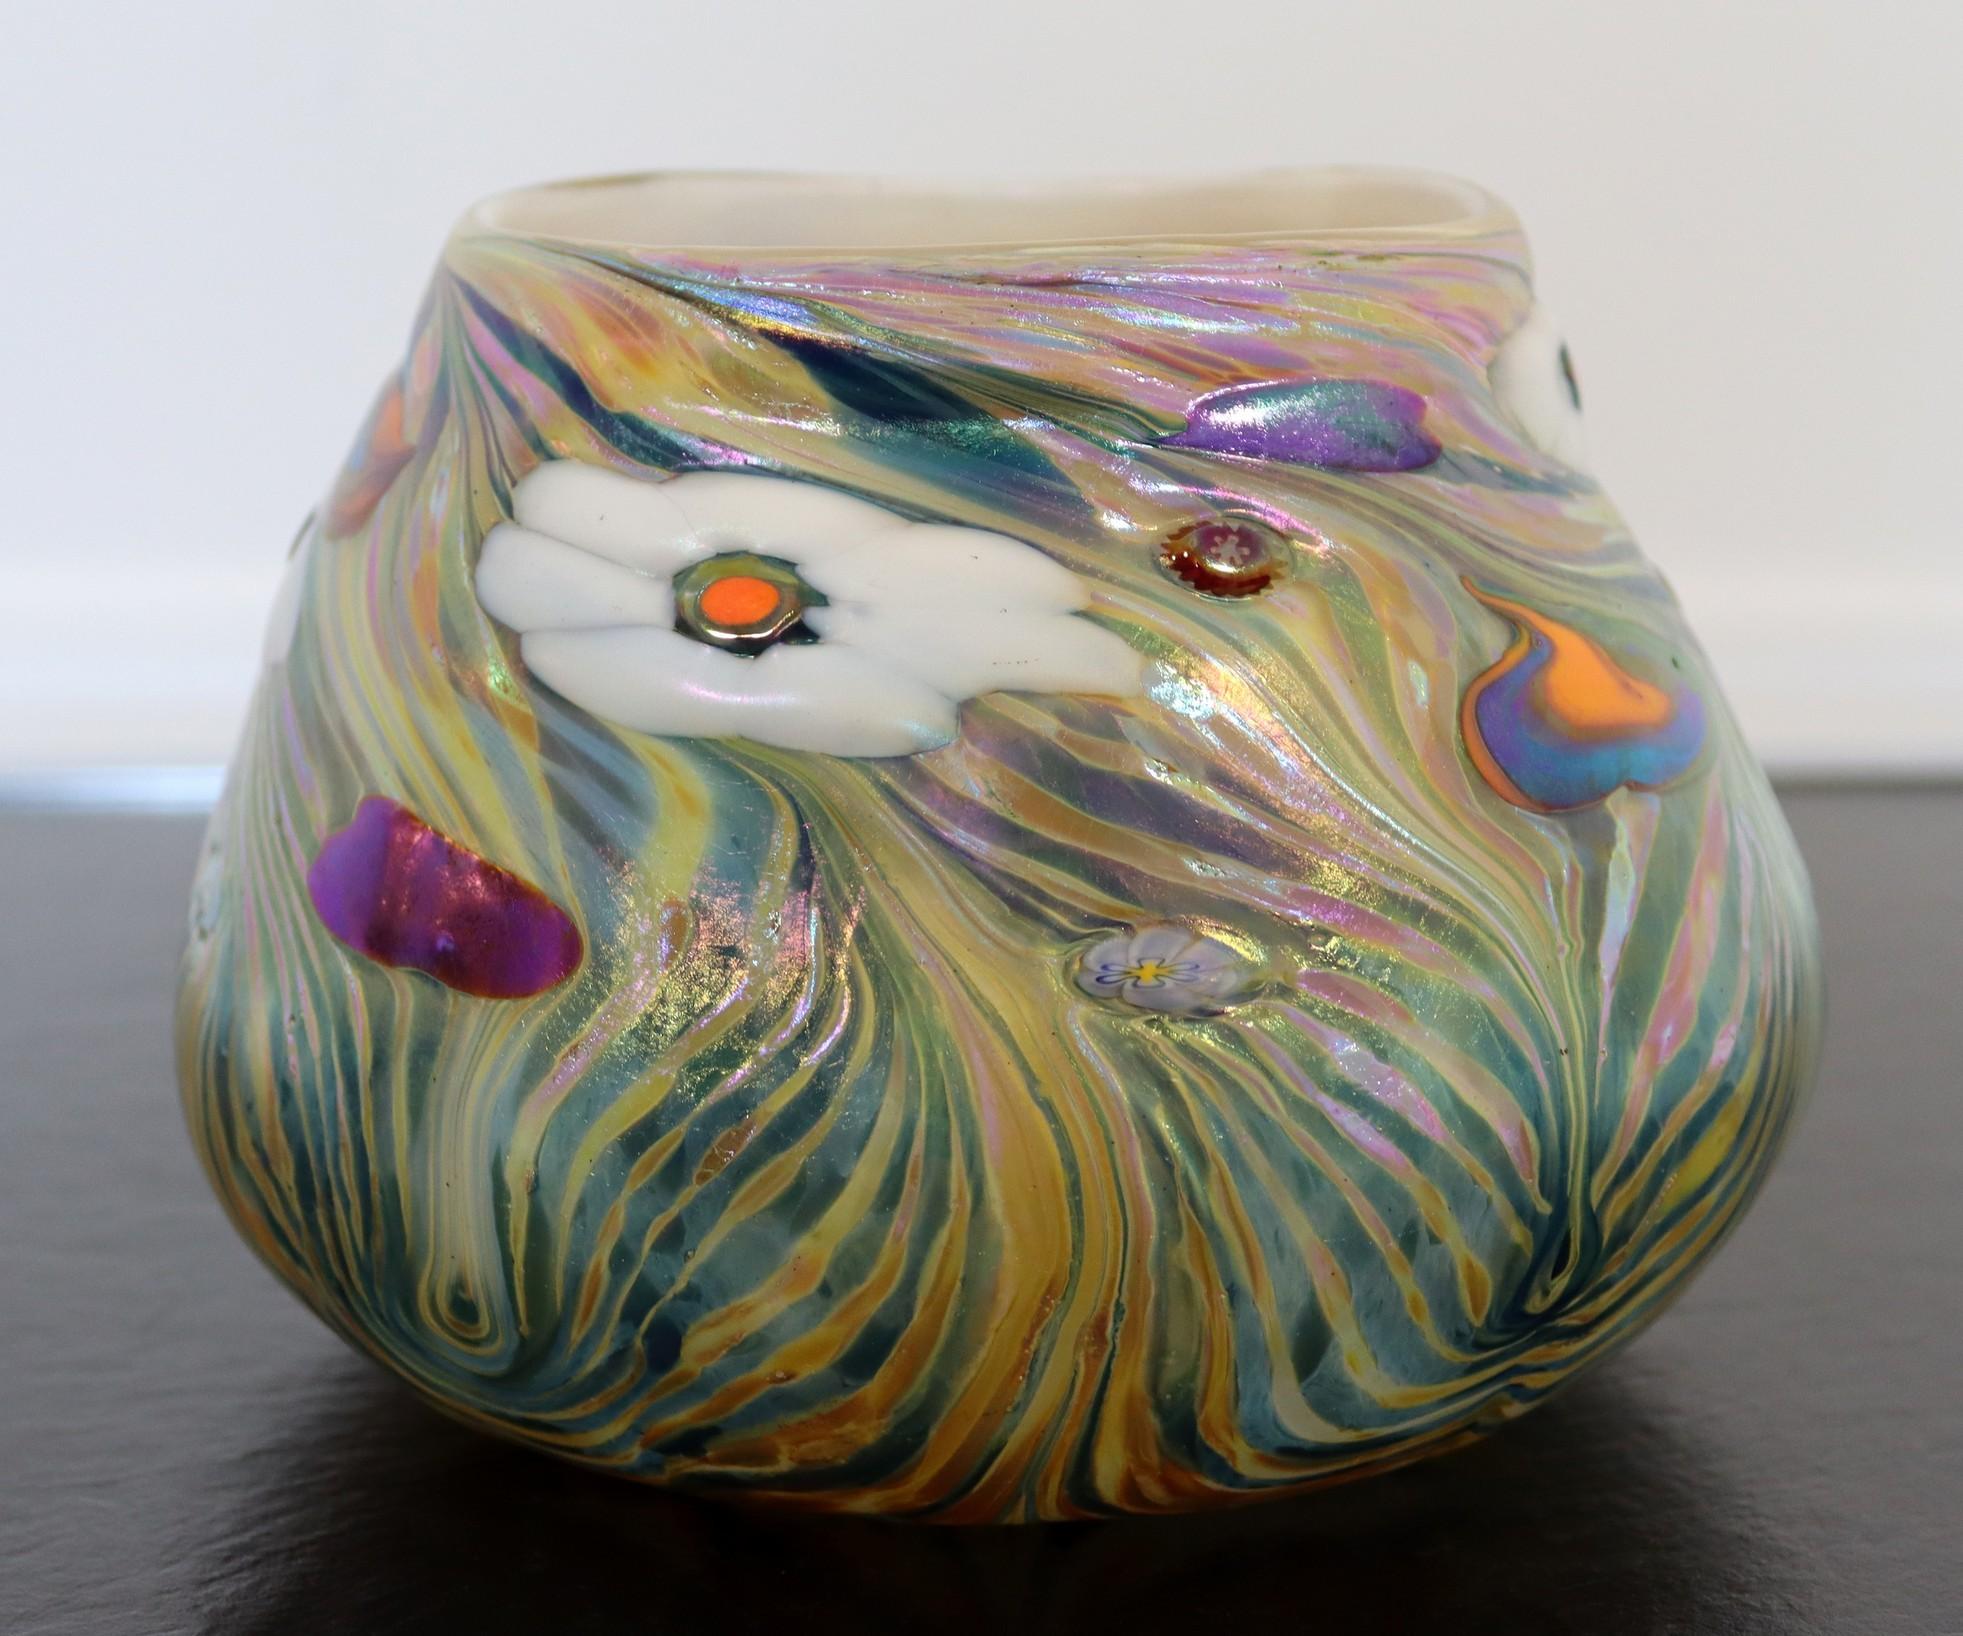 For your consideration is a marvelous hand blown iridescent carnival glass vessel with a flower design titled 